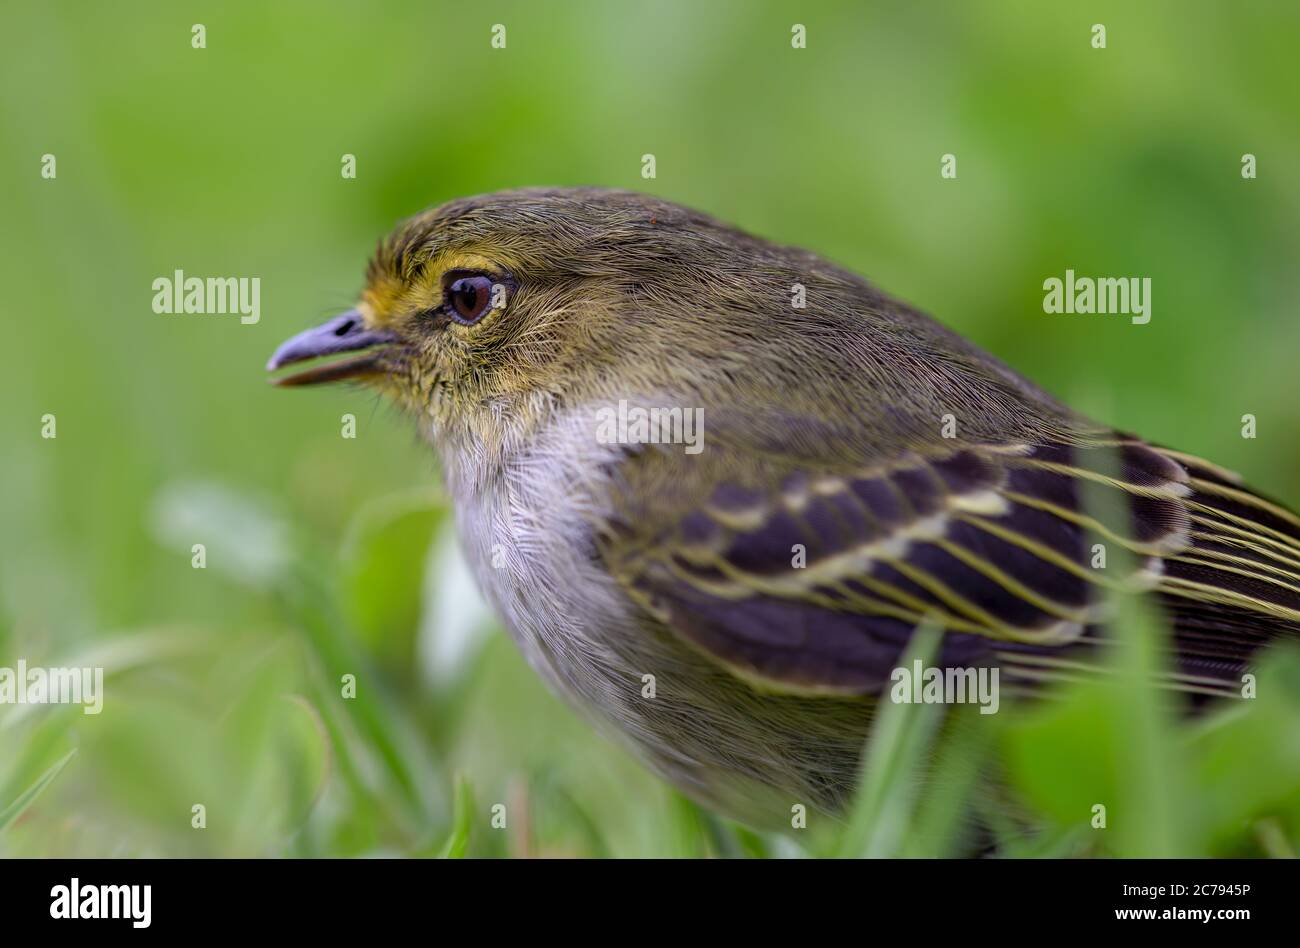 Macro photography of a little golden-faced tyrannulet bird, captured at highlands near the town of Villa de Leyva, in the Andean mountains of Colombia Stock Photo